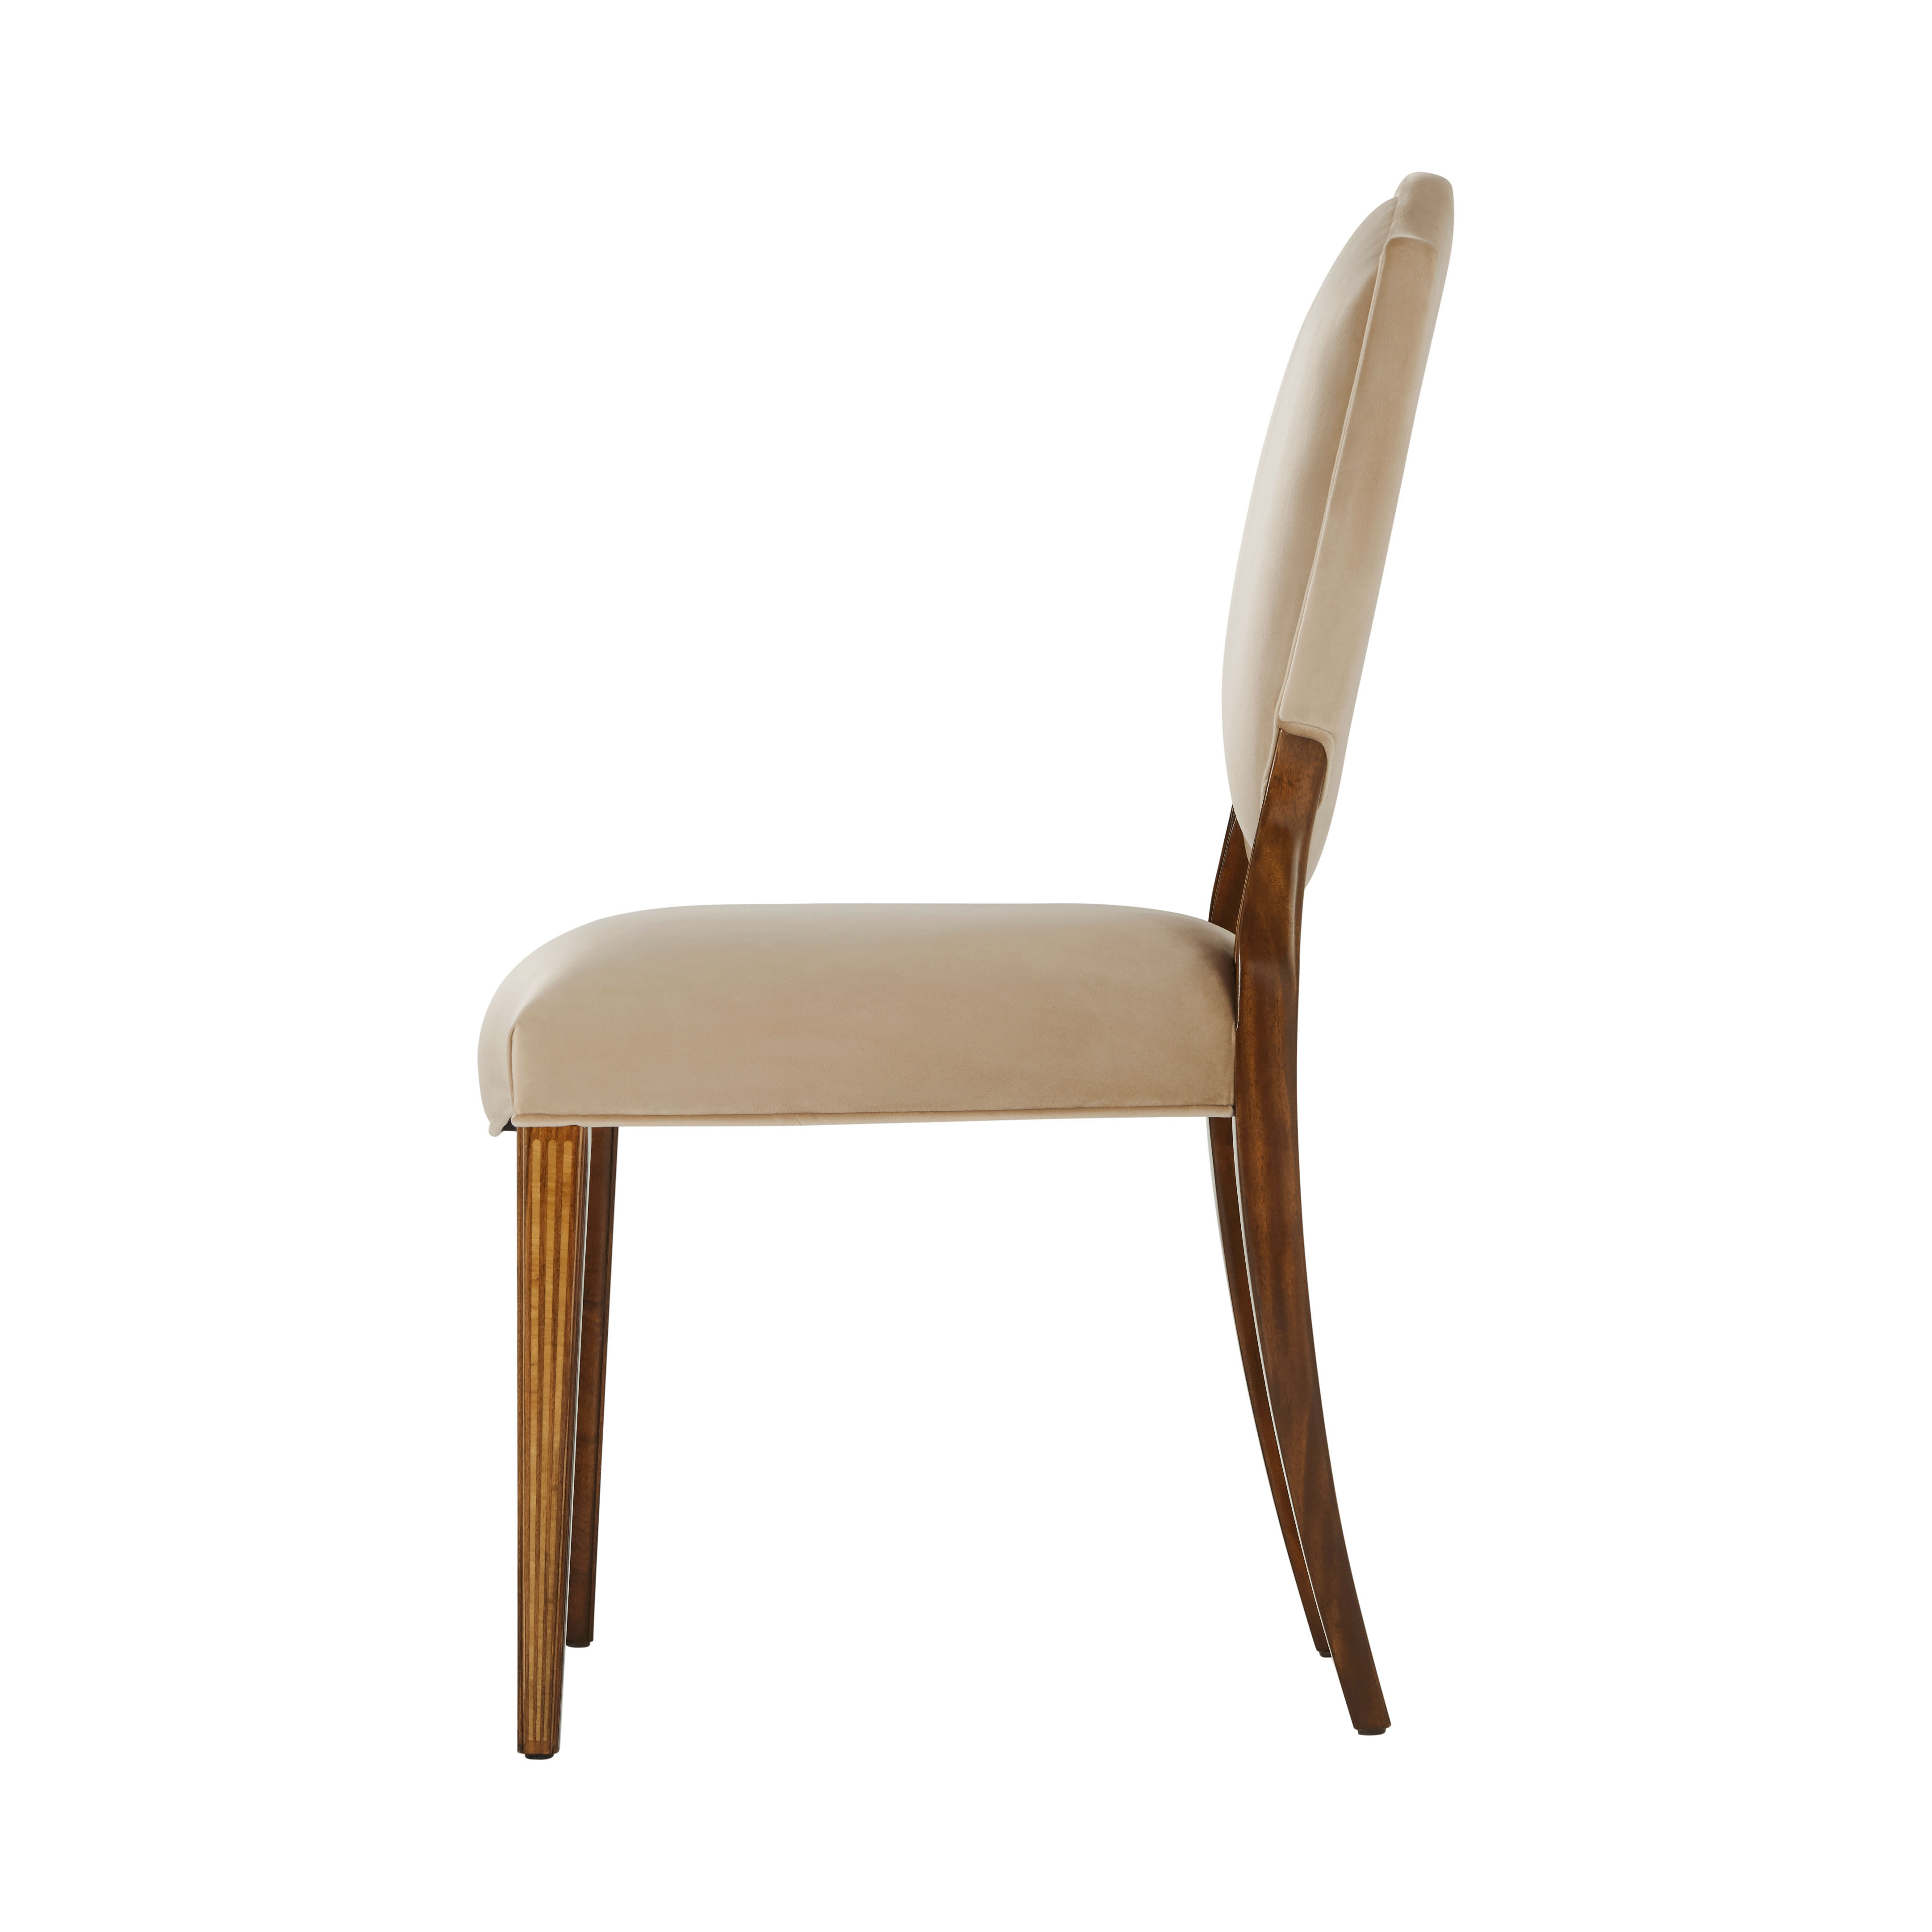 THE HOLBORN DINING SIDE CHAIR